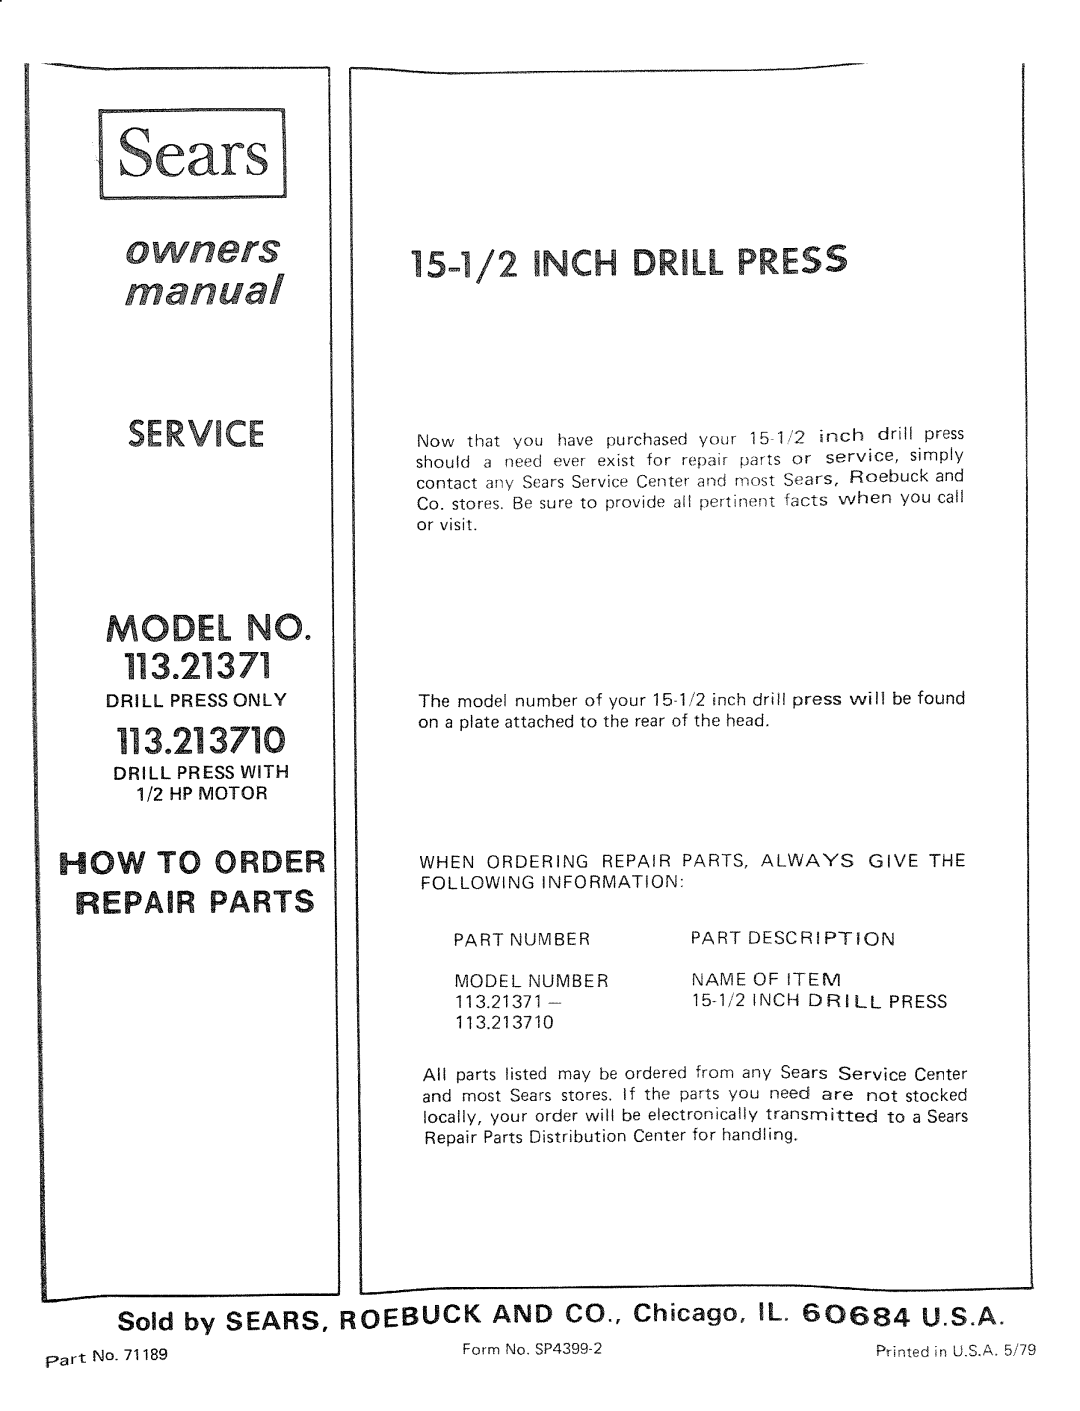 Sears 113.21371 manual 5/2 NCH DRILL PRESS, Service, 113.2!3710, Model No, How To Order Repair Parts 